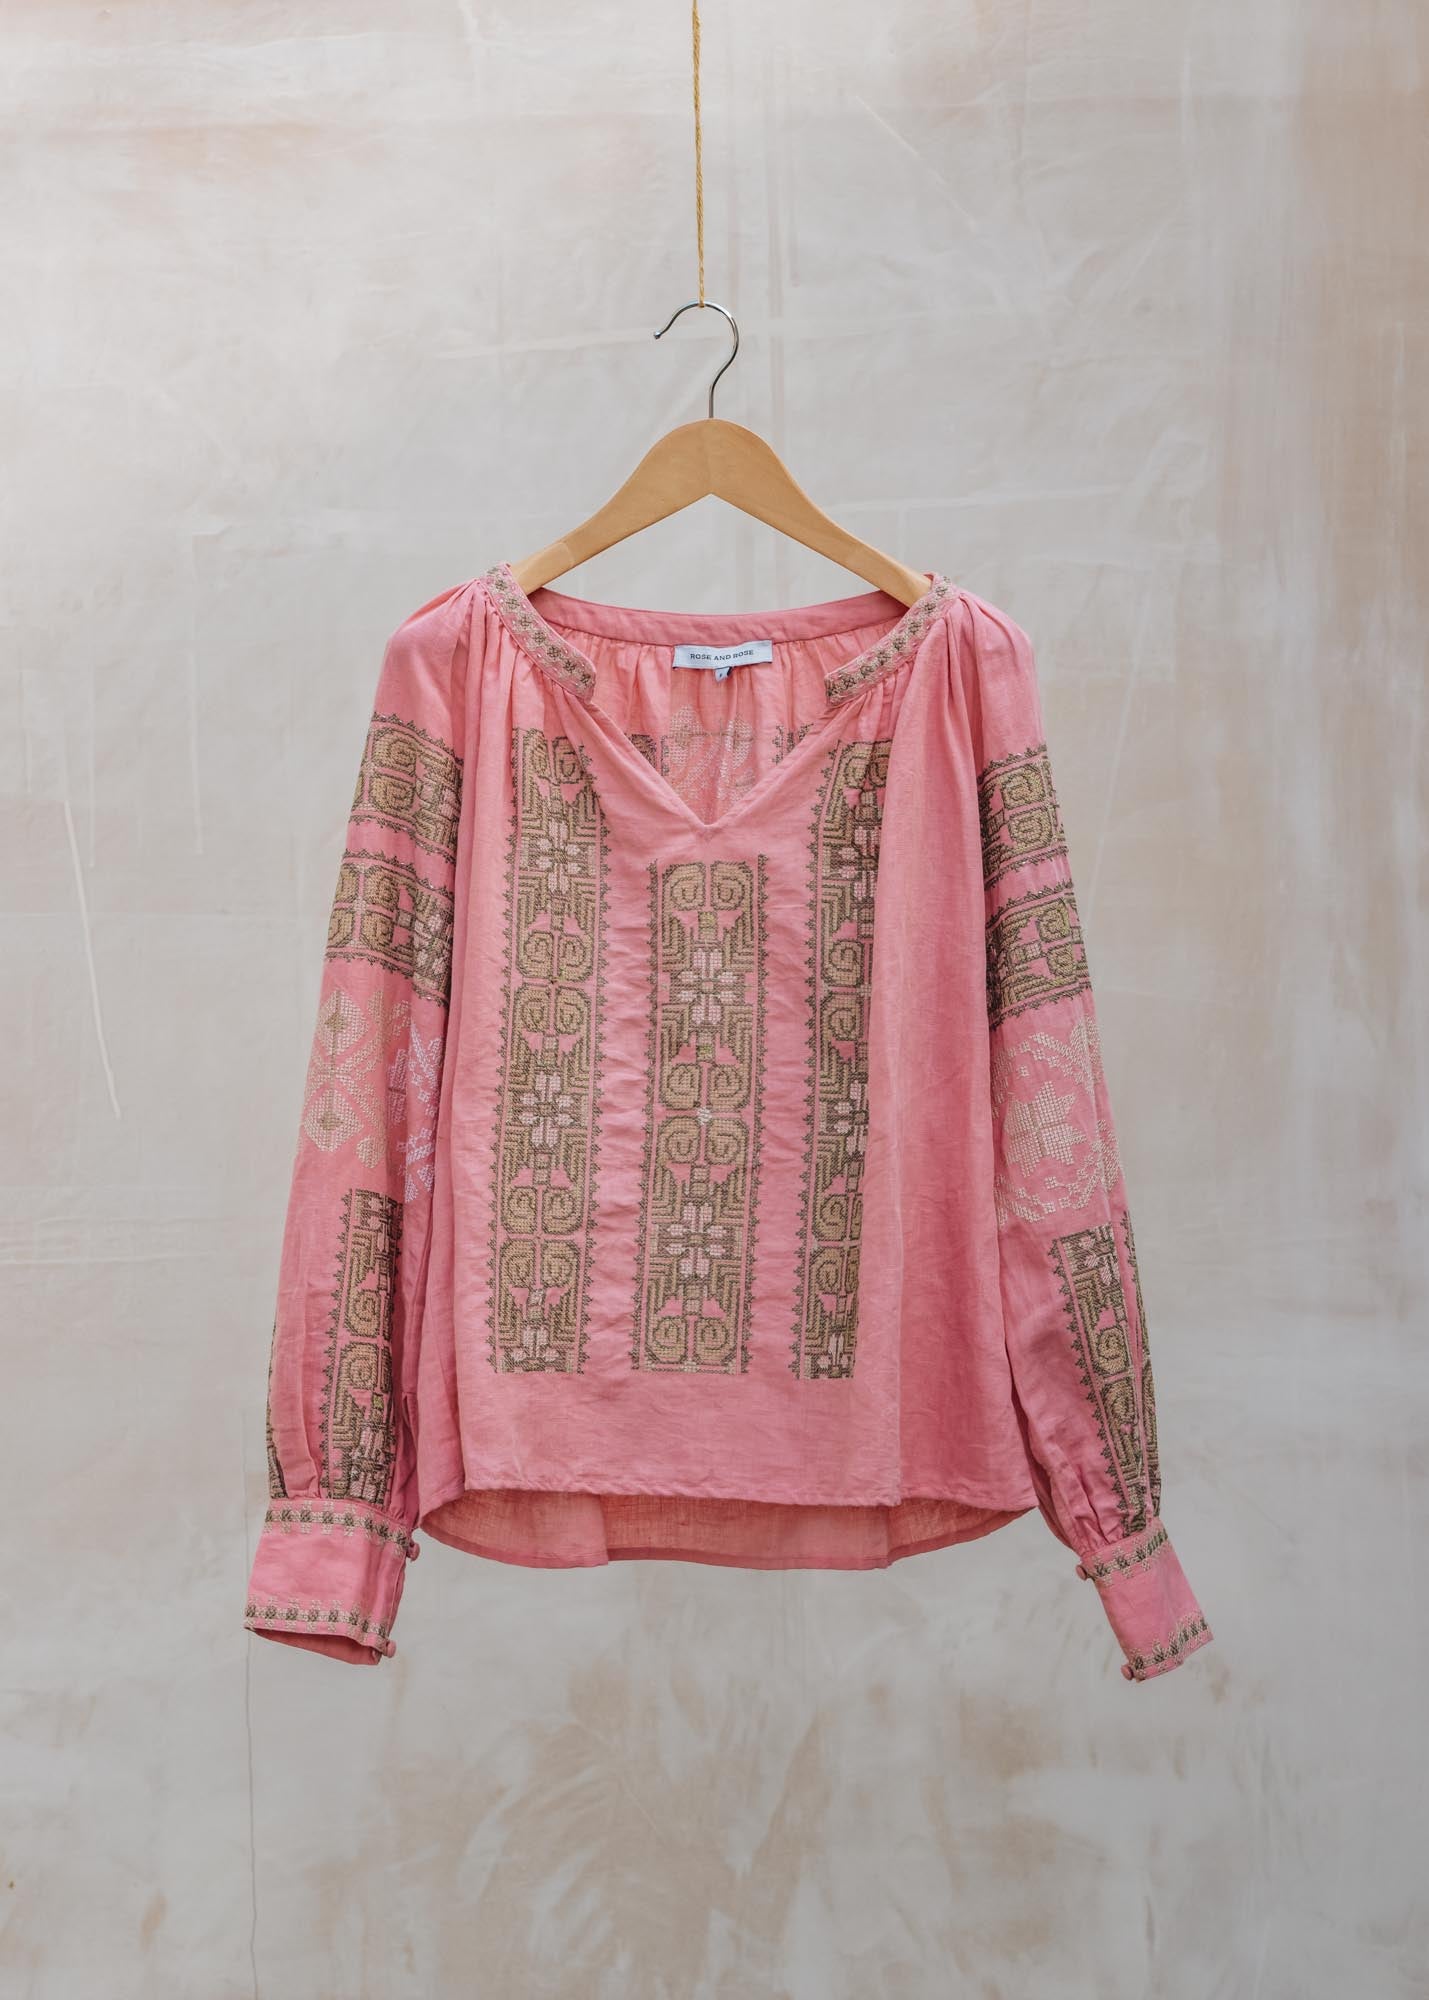 Rose & Rose Ekland Beads Top in Pink Berry and Olive